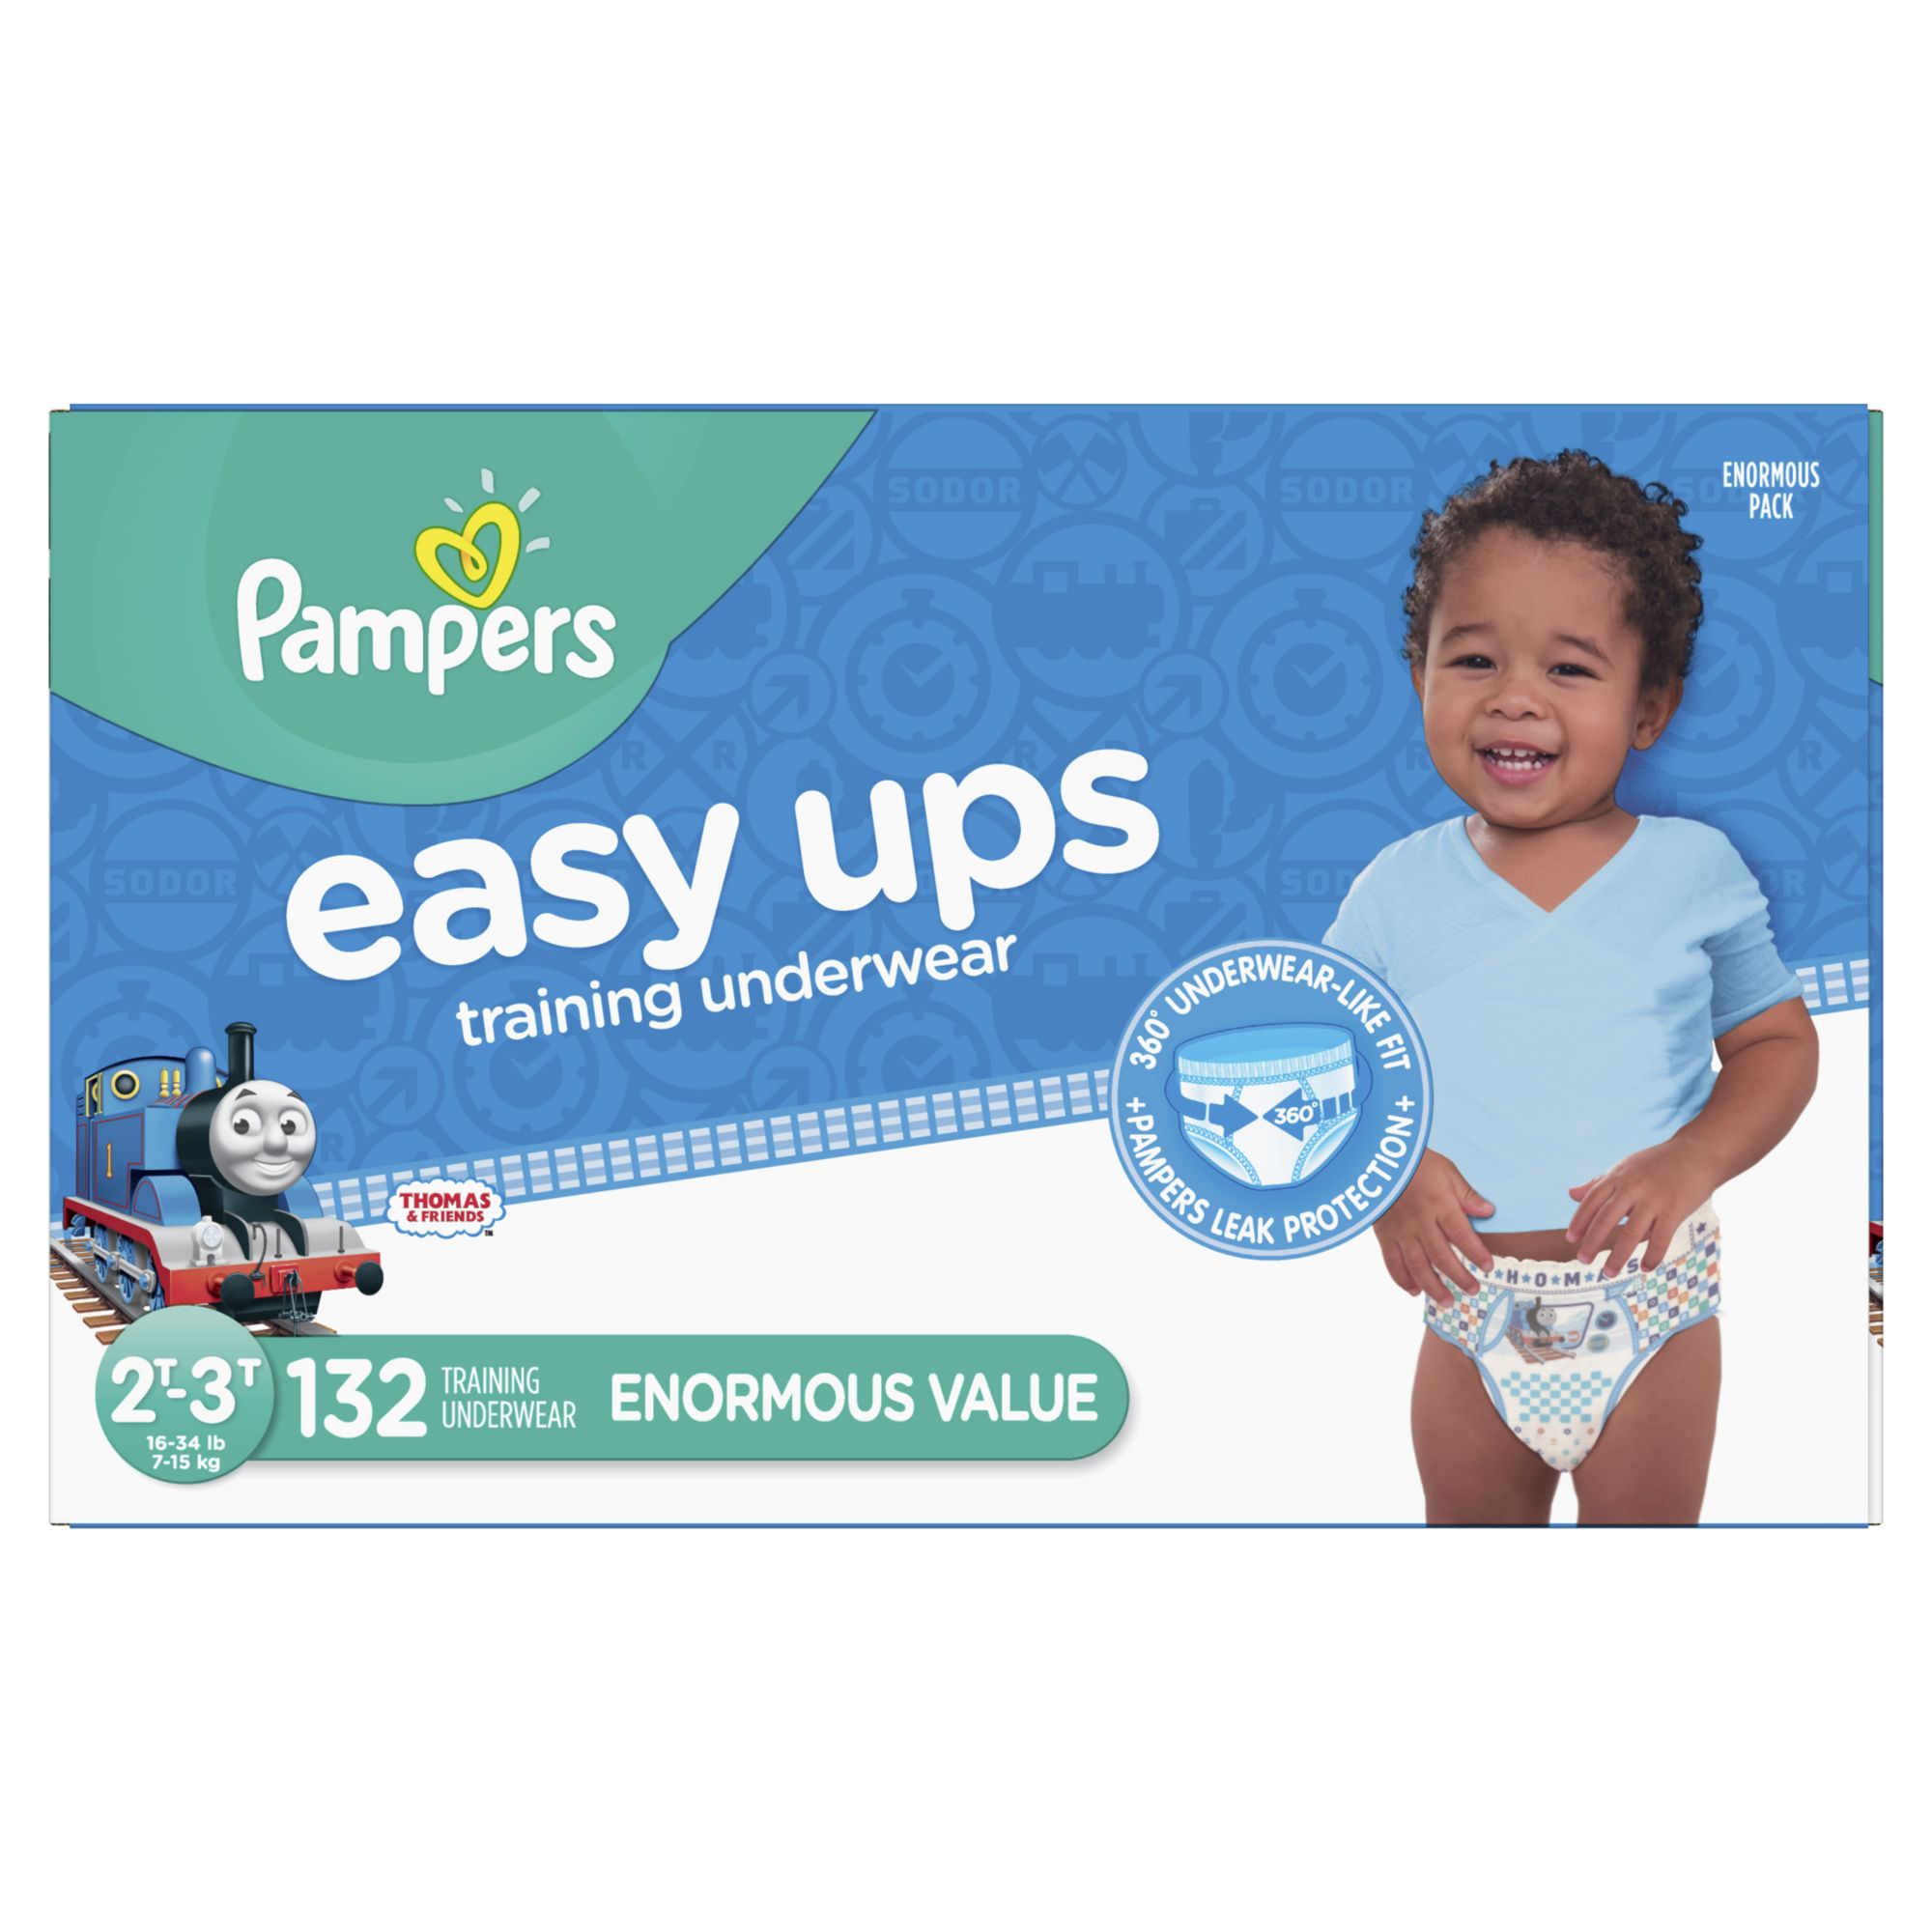 Pampers Pure Protection Training Underwear Baby Shark Size 3T-4T